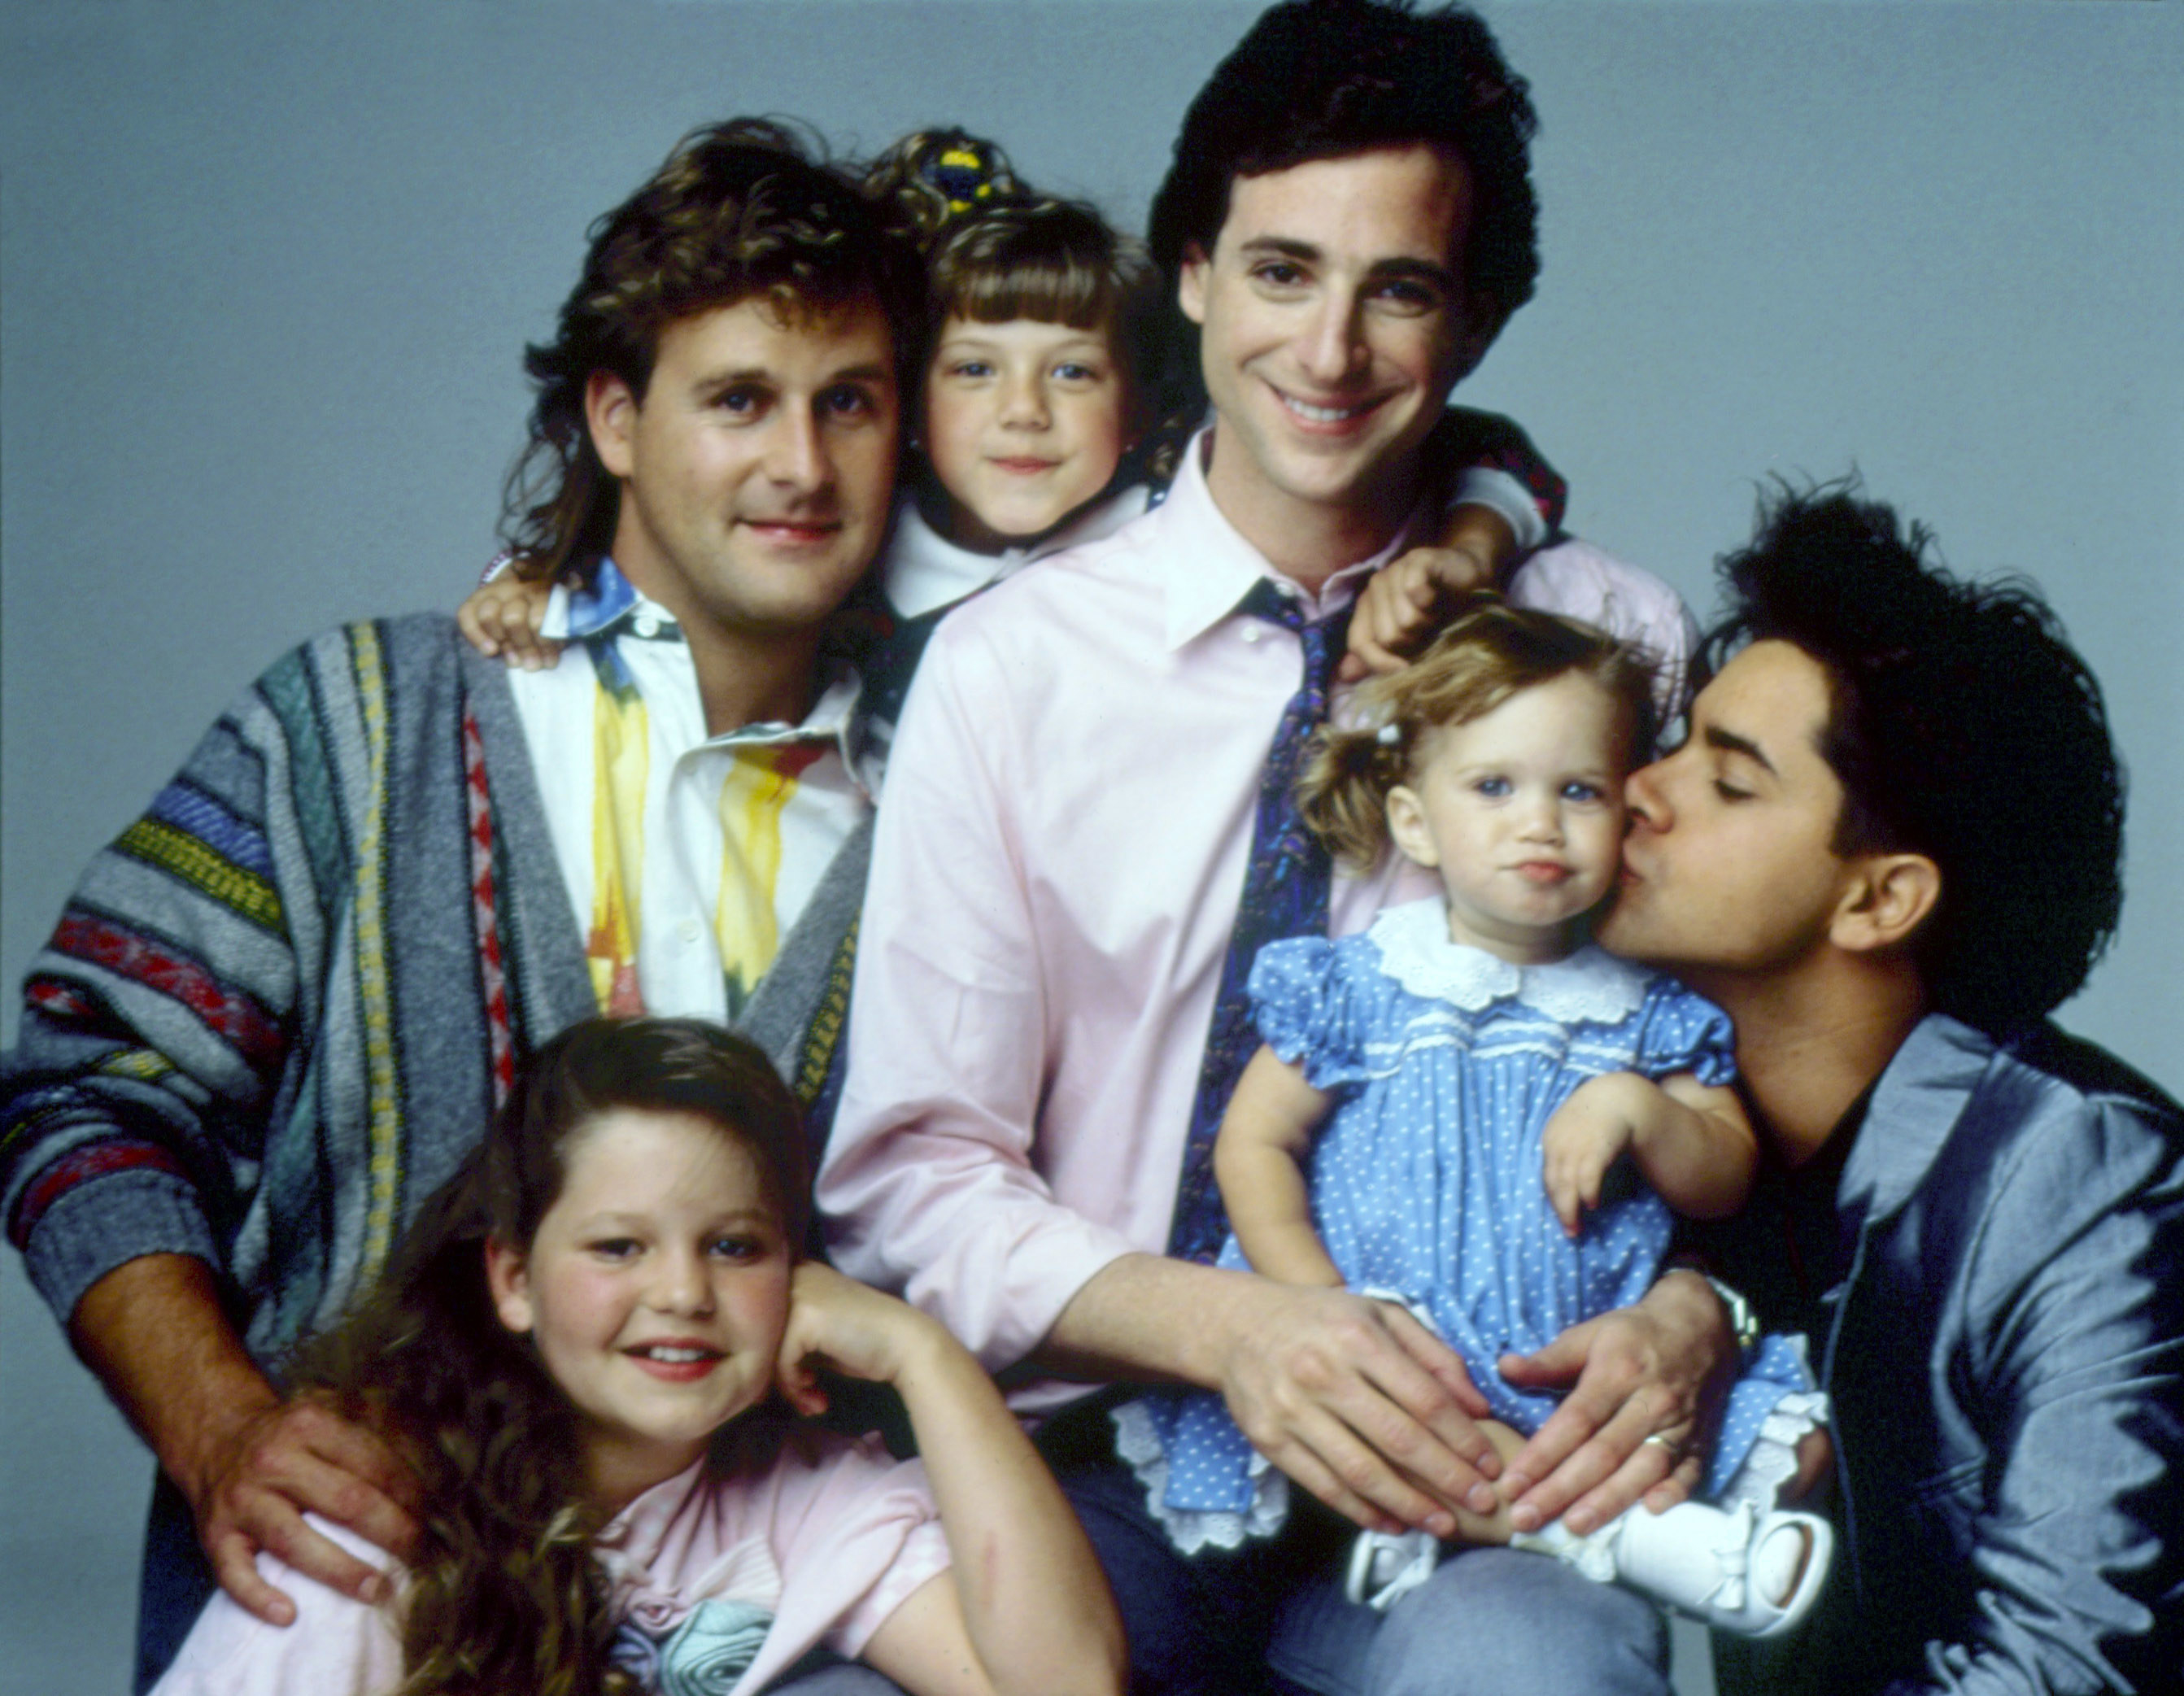 Bob and the rest of the cast of Full House